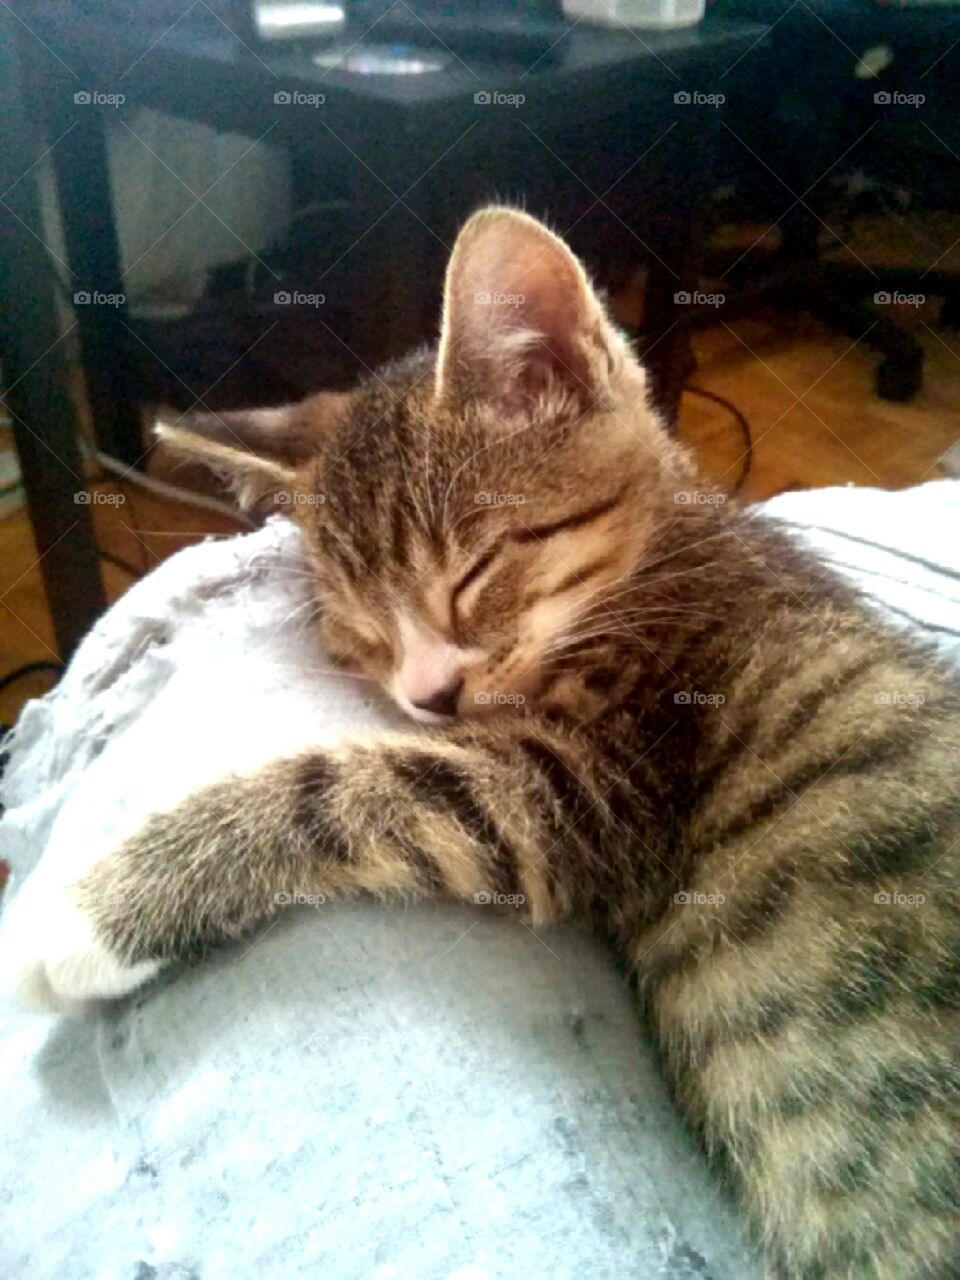 Sleeping Kitten. This is Oddie (Oh-dee). Fast asleep on my lap with a baby blanket after an exhausting playtime!